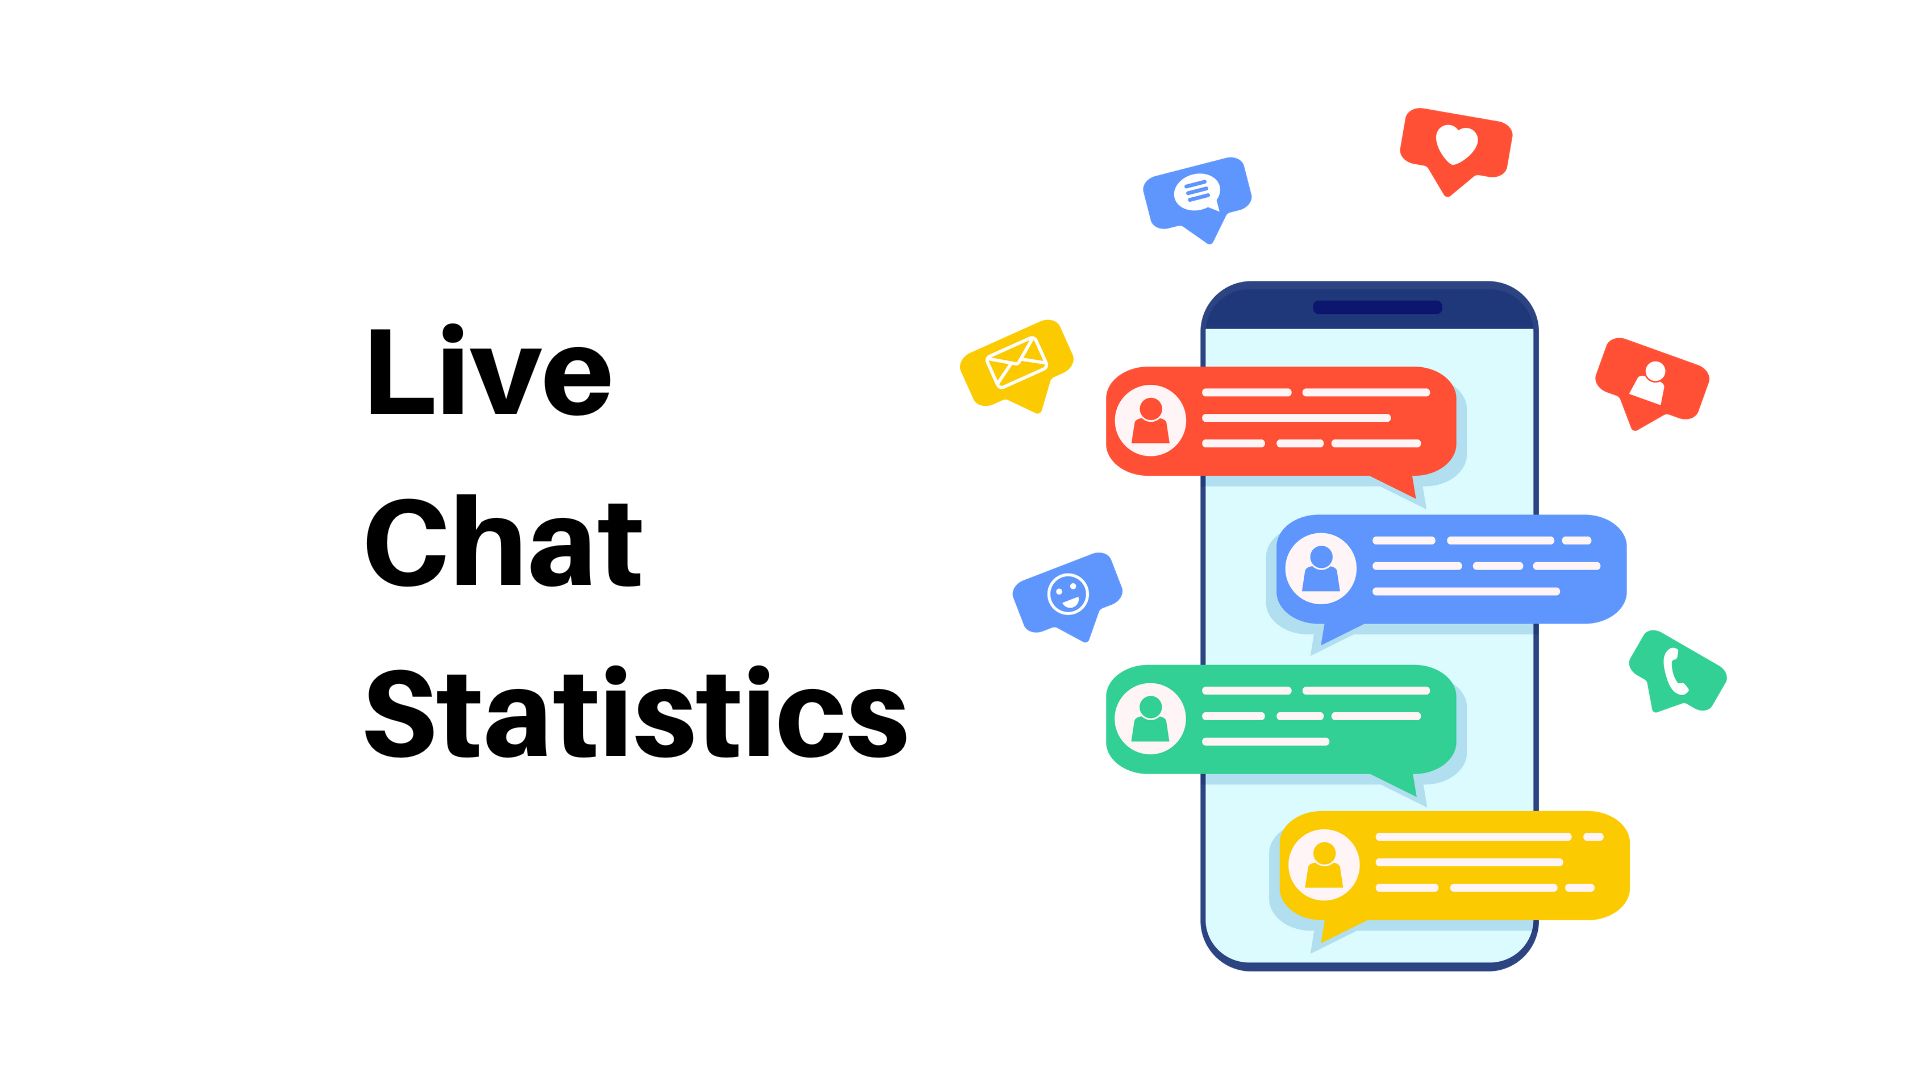 Faster, smarter support with LiveChat